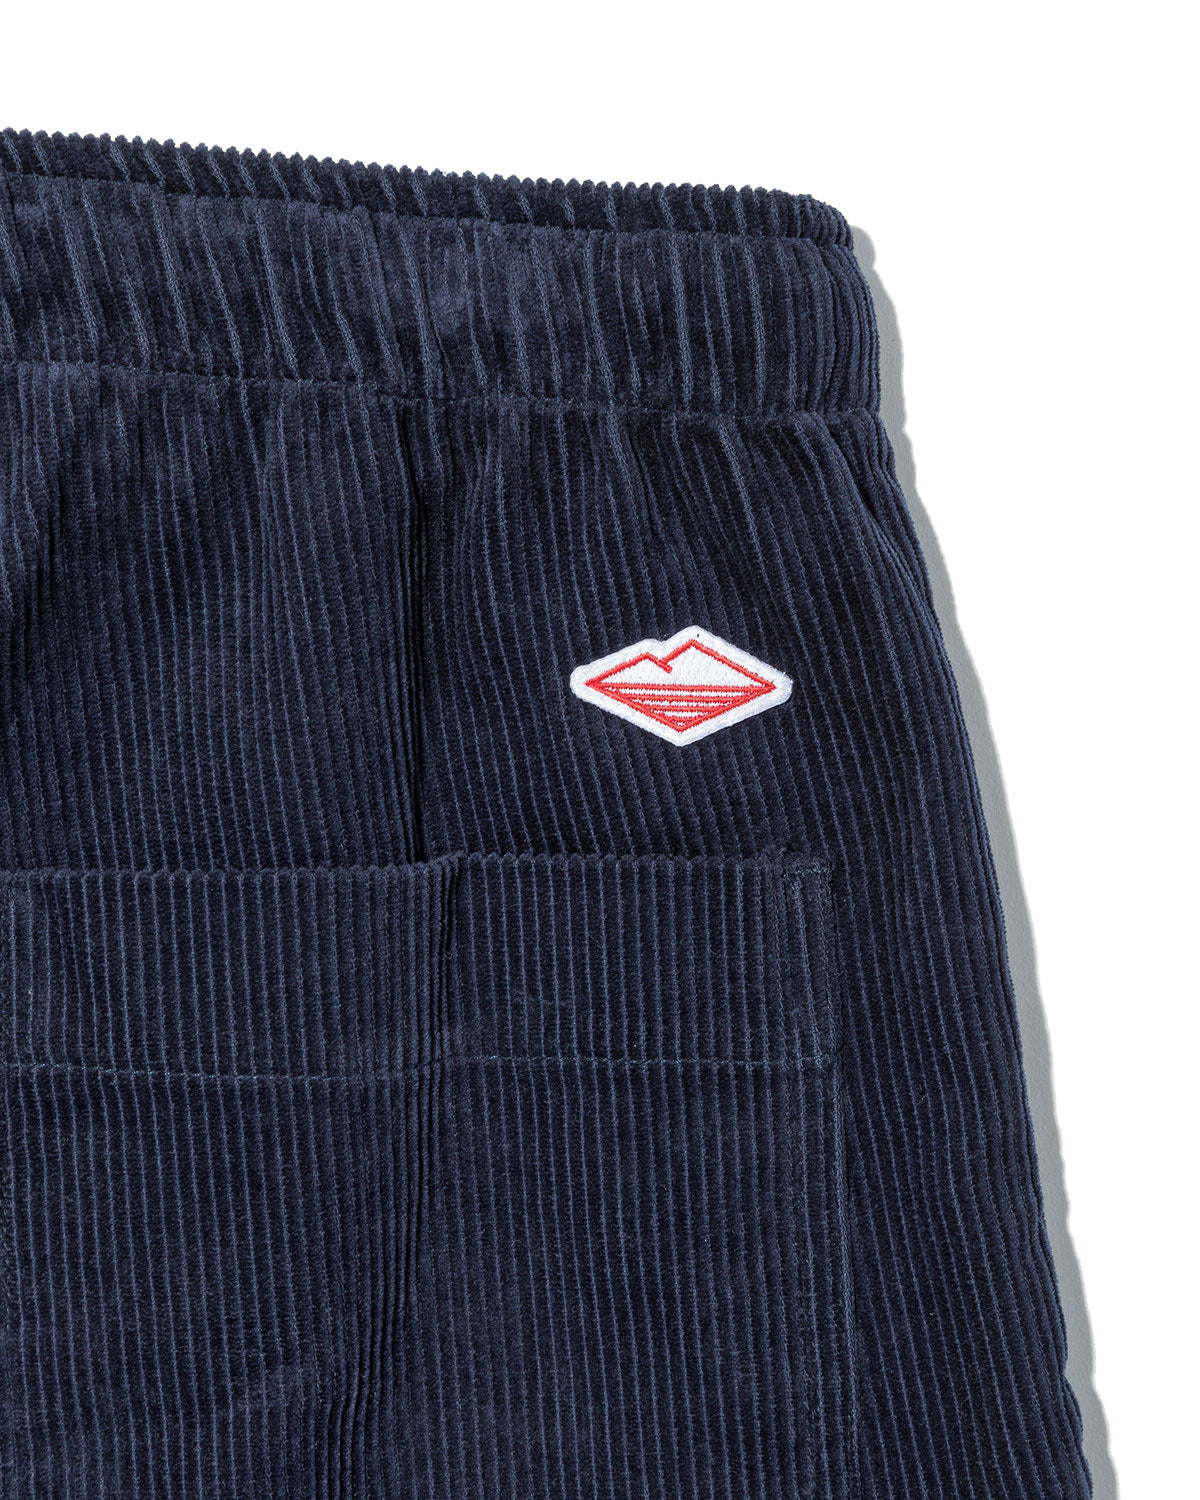 Battenwear〉Active Lazy Pants / Navy Corduroy｜UP NORTH ONLINE STORE